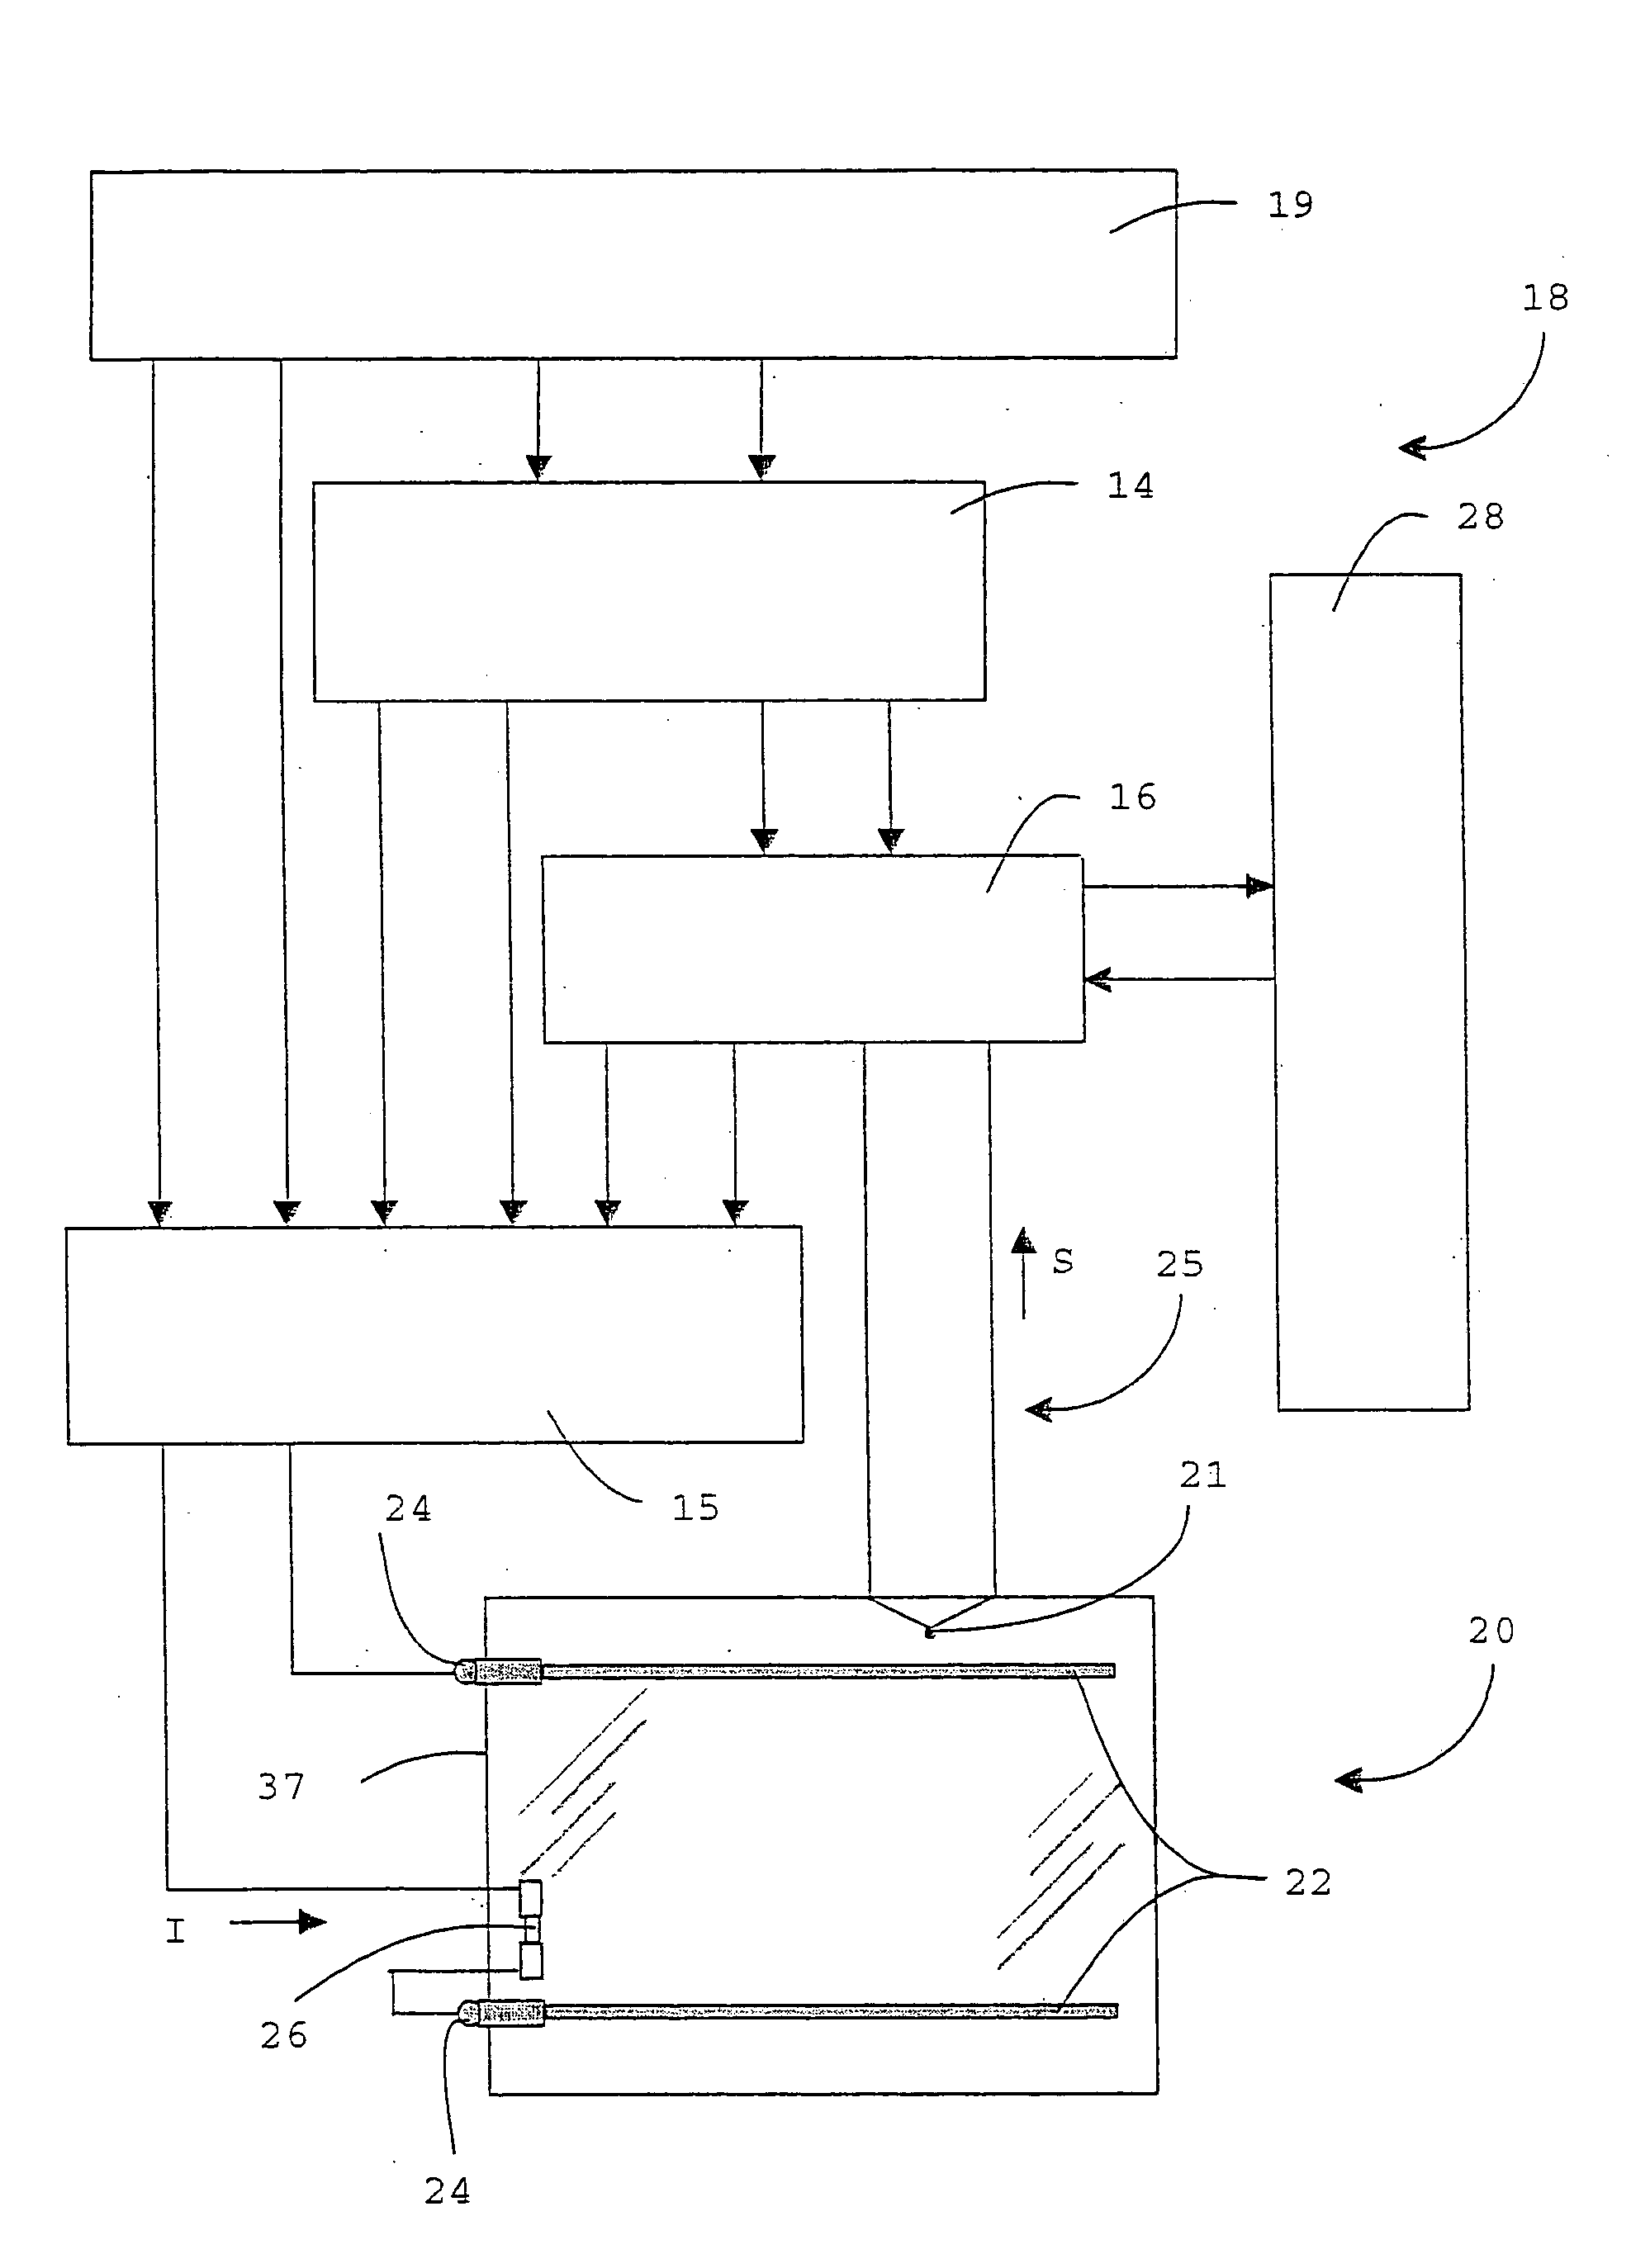 Method for forming heated glass panels